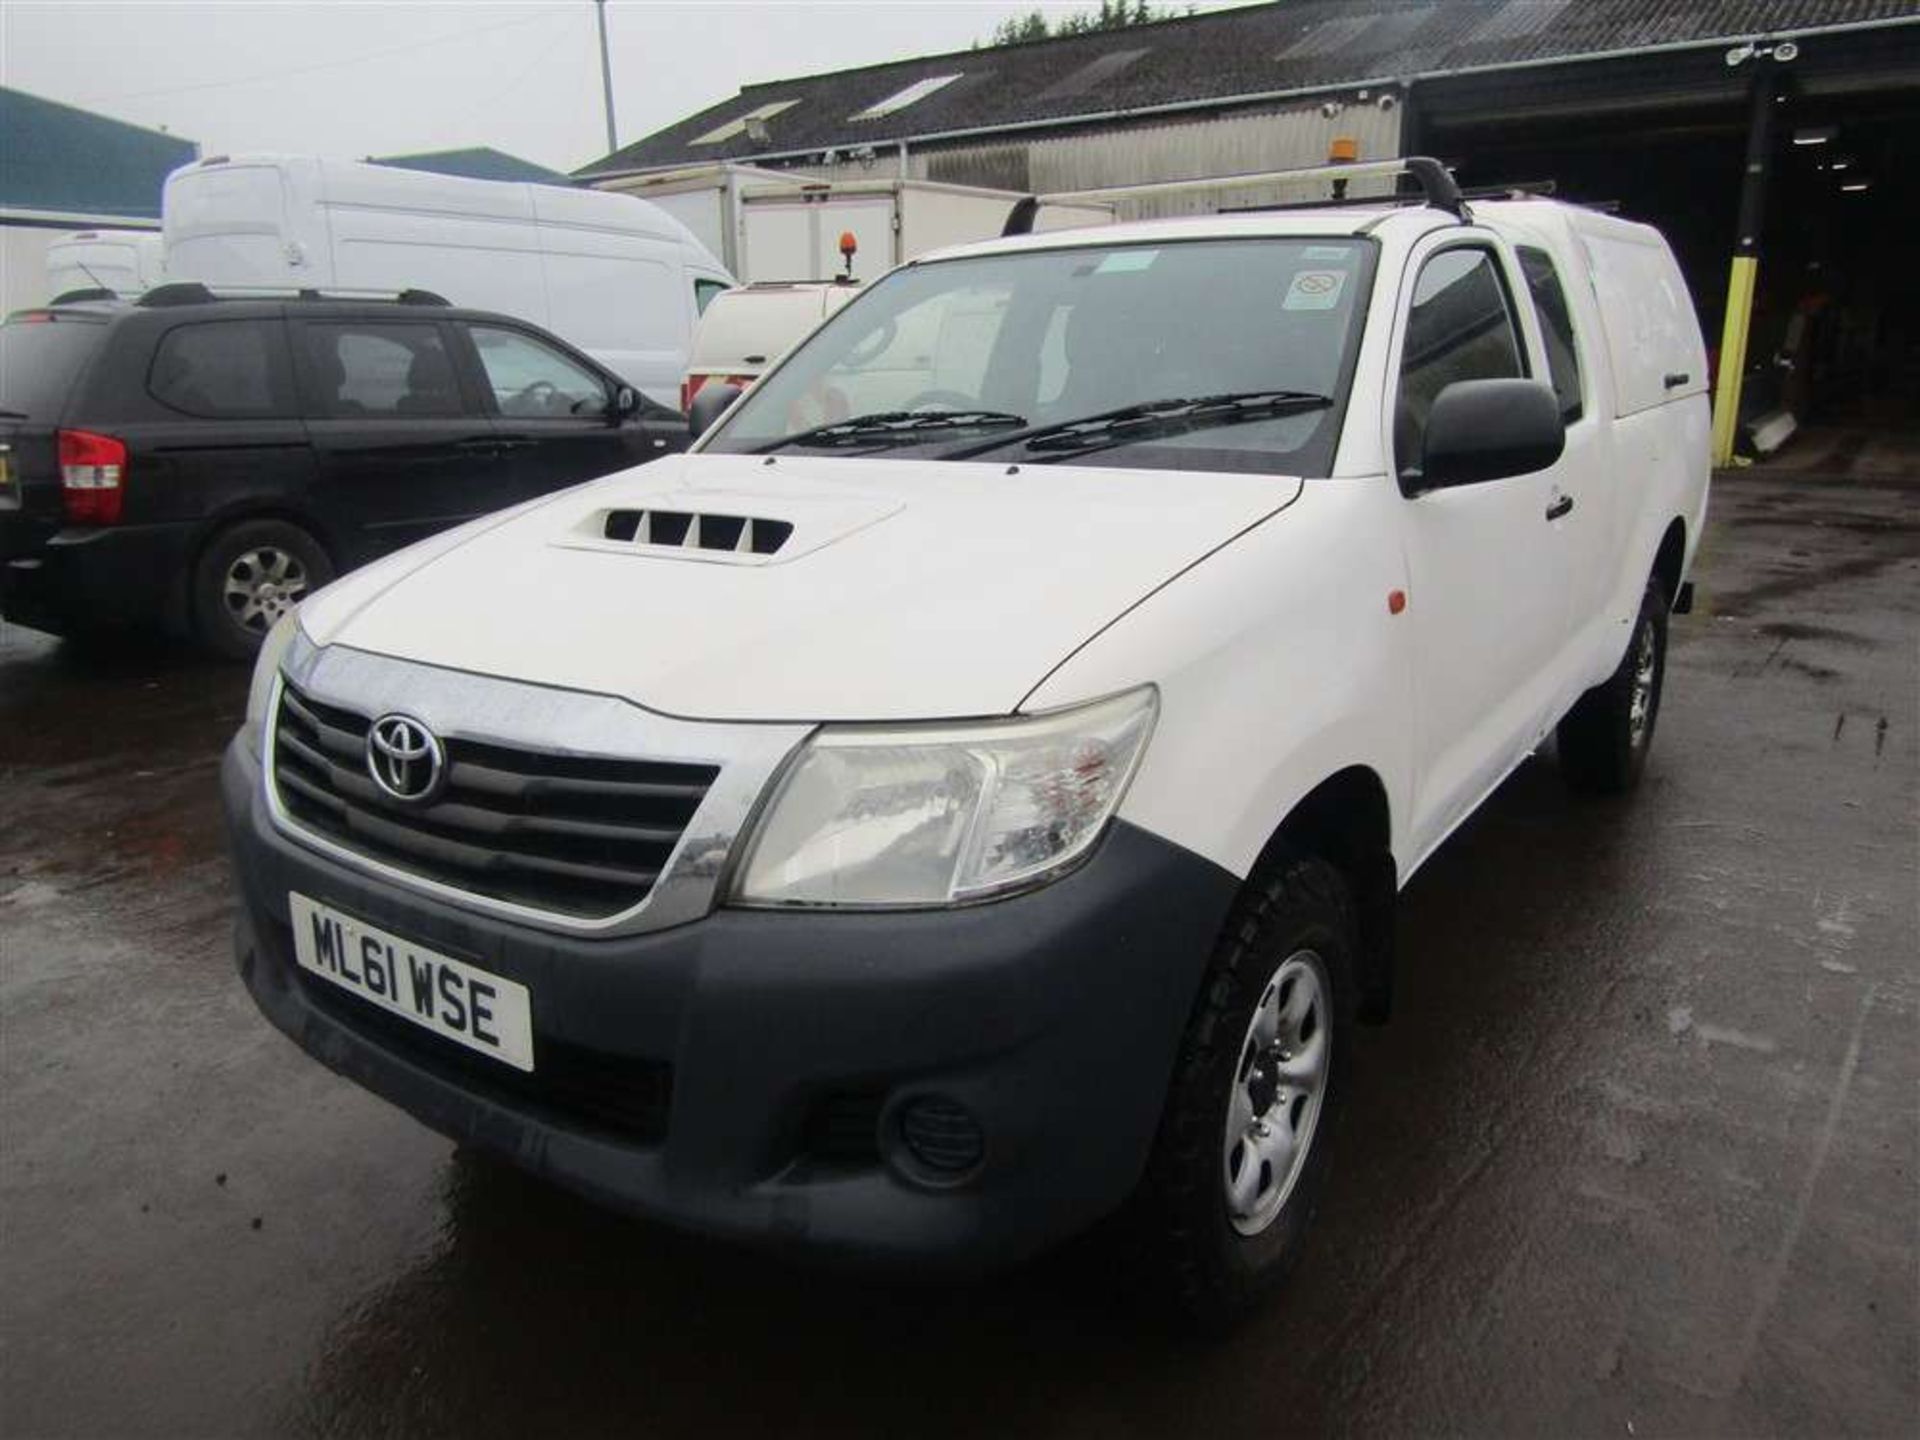 2011 61 reg Toyota Hilux HL2 D-4D 4 x 4 ECB (Direct United Utilities Water) - Image 2 of 6